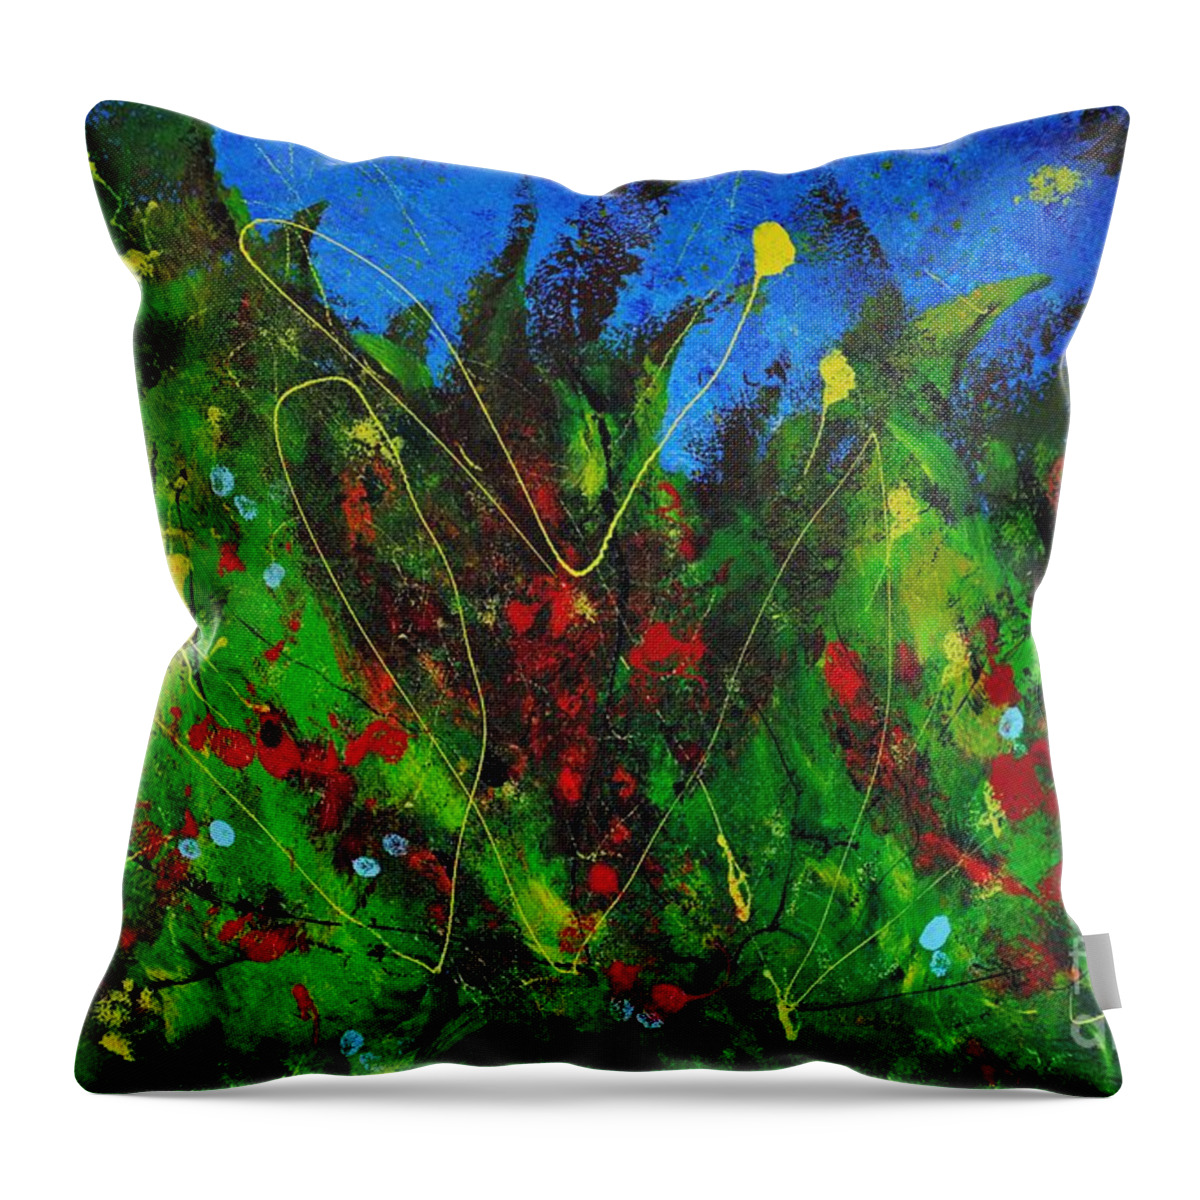 Abstract Throw Pillow featuring the painting Tropical garden by Chani Demuijlder